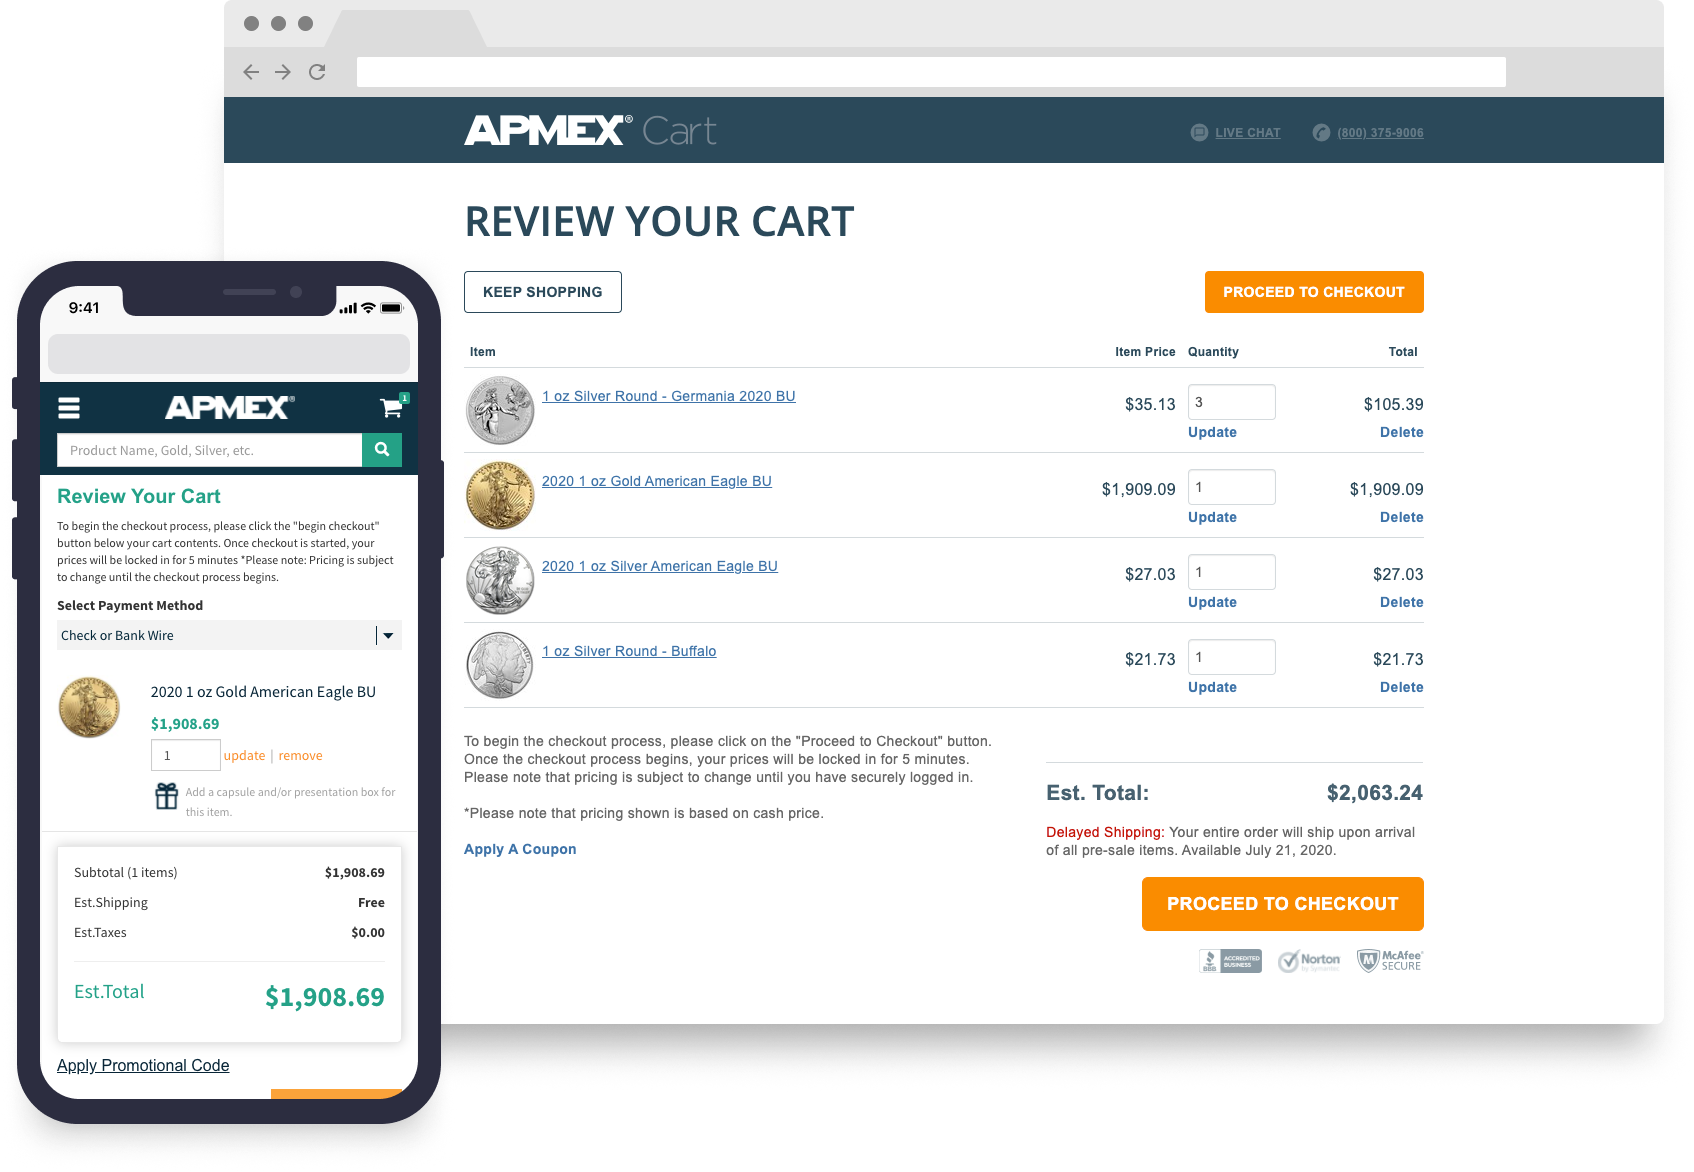 The checkout process for APMEX, inc.